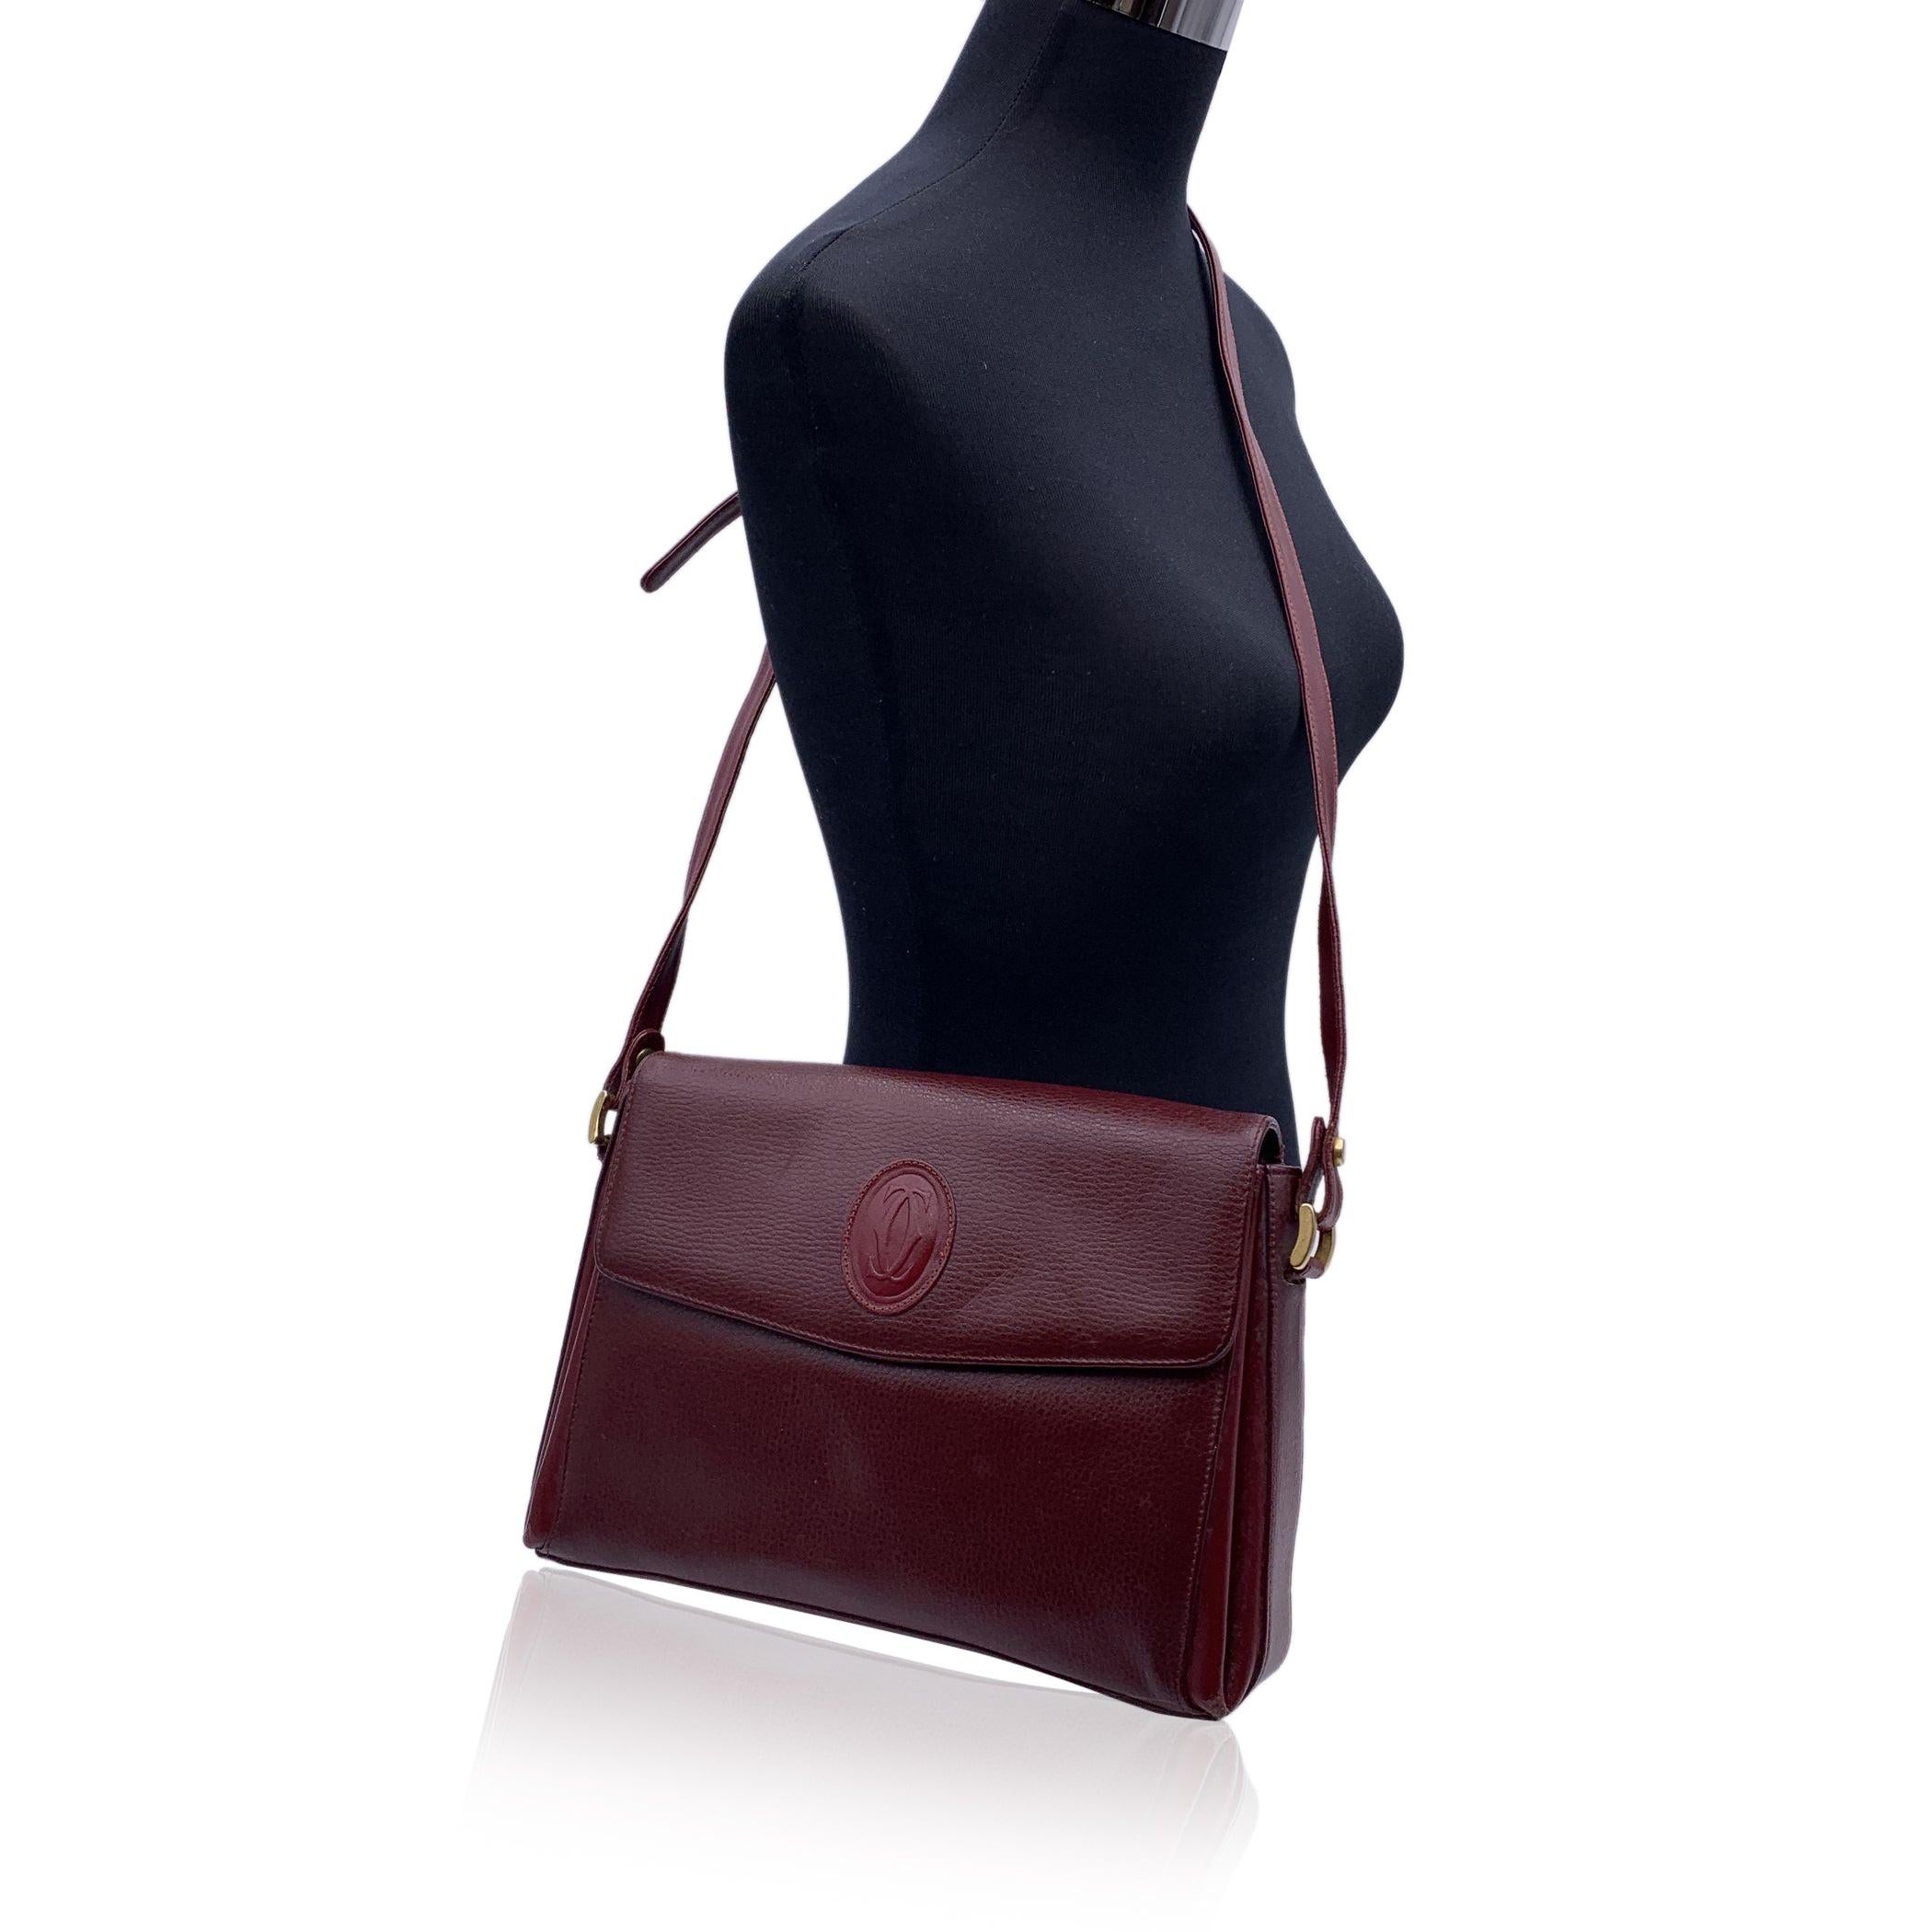 This beautiful Bag will come with a certificate of authenticity provided by third party authenticators. The certificate will be provided at no further cost CARTIER Paris Vintage shoulder bag in Burgundy genuine leather. Flap with magnetic button